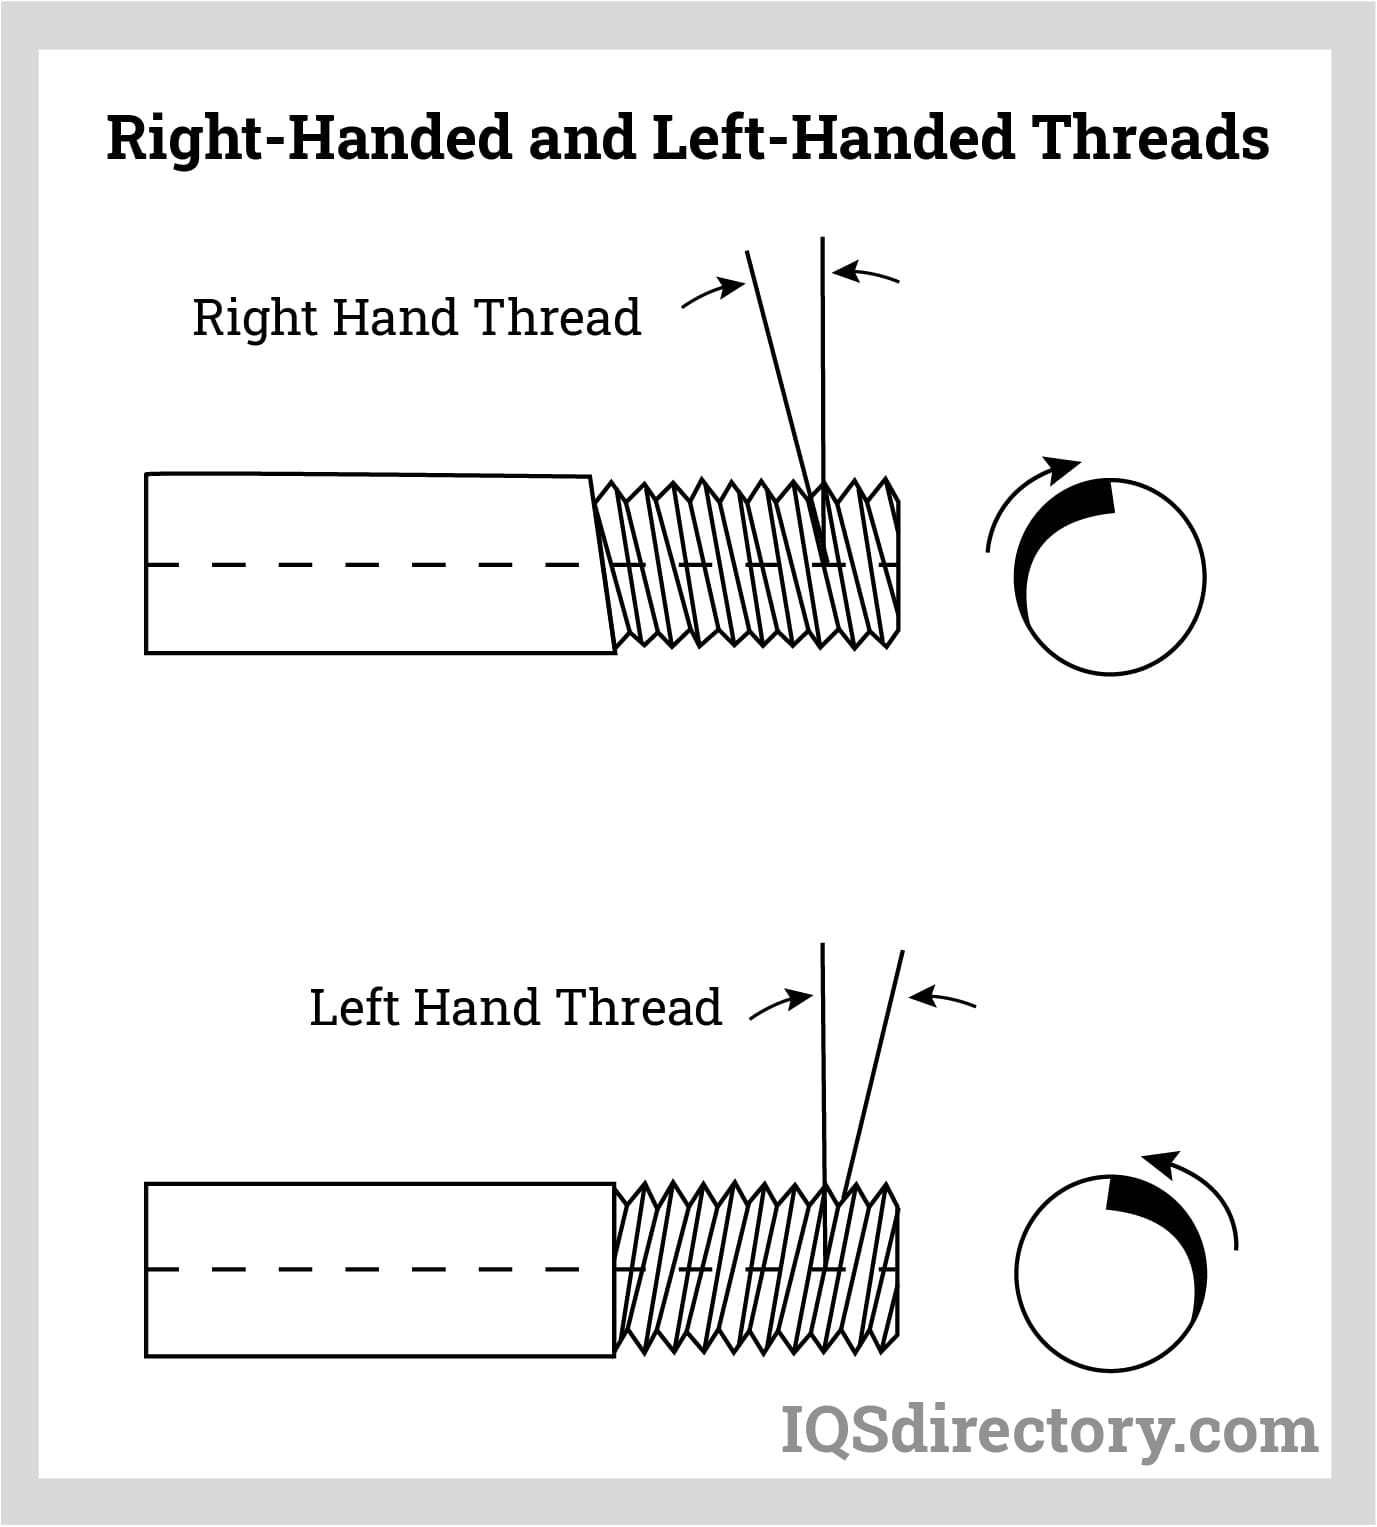 Right-Handed and Left-Handed Threads